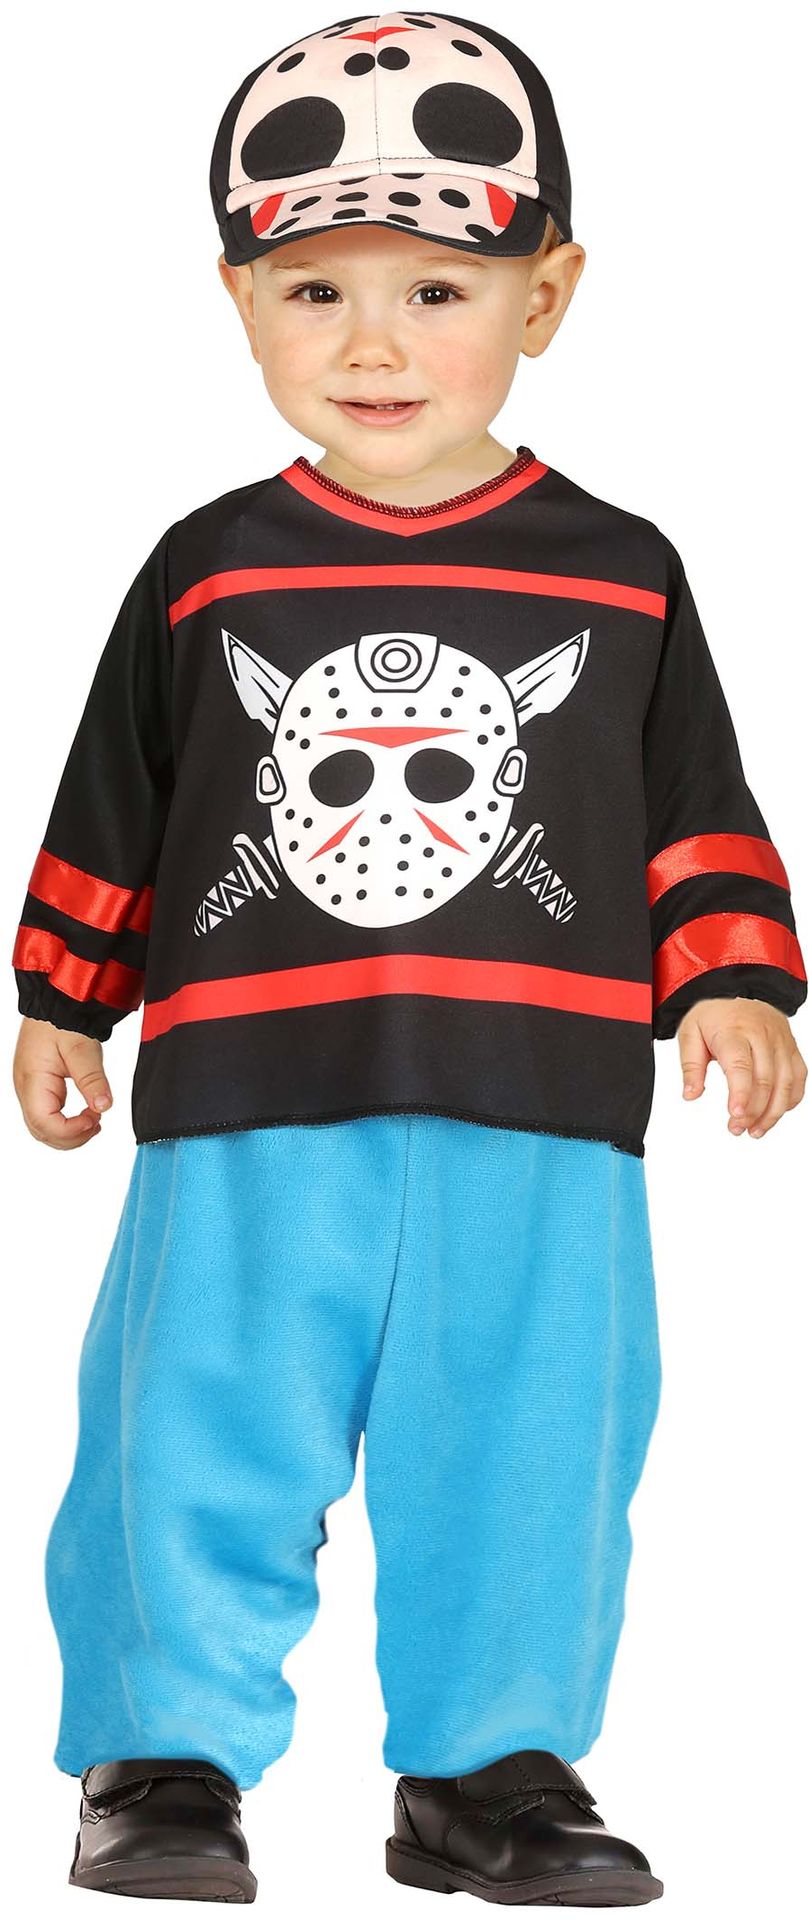 Jason outfit baby